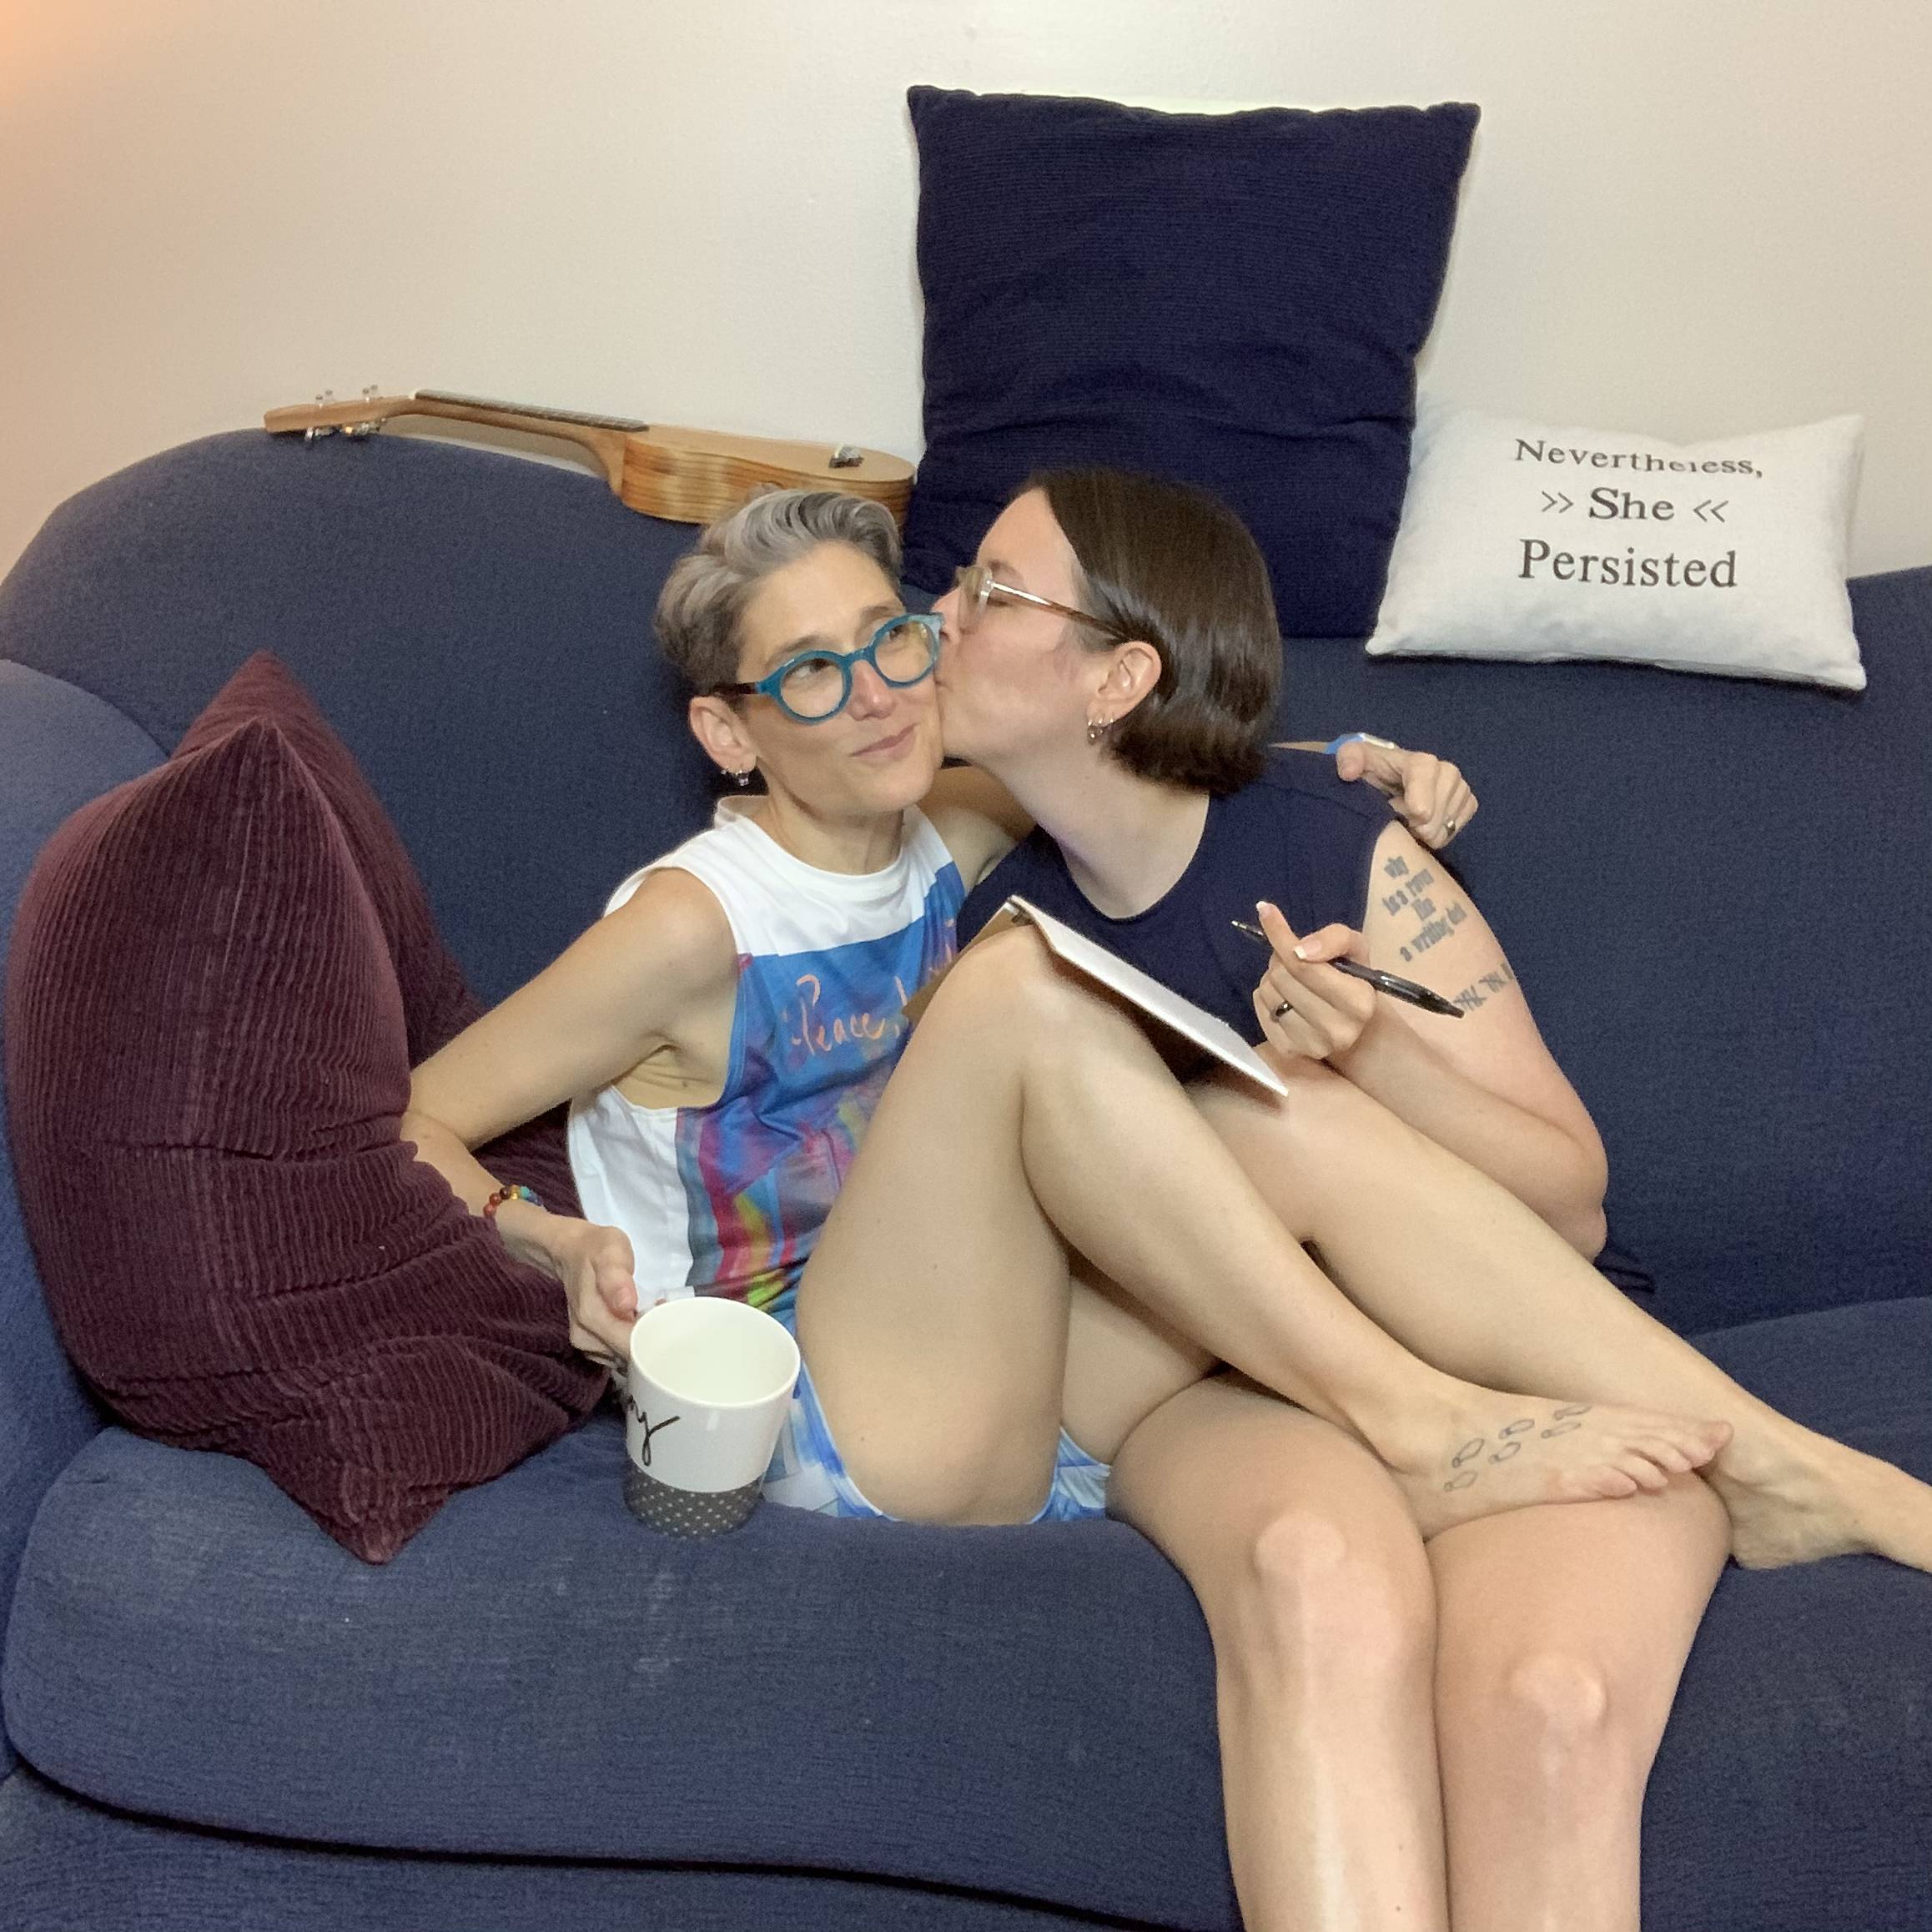 Dapper Mindy and Megan cuddle on the sofa wearing Play Out gender equal muscle T's and underwear.